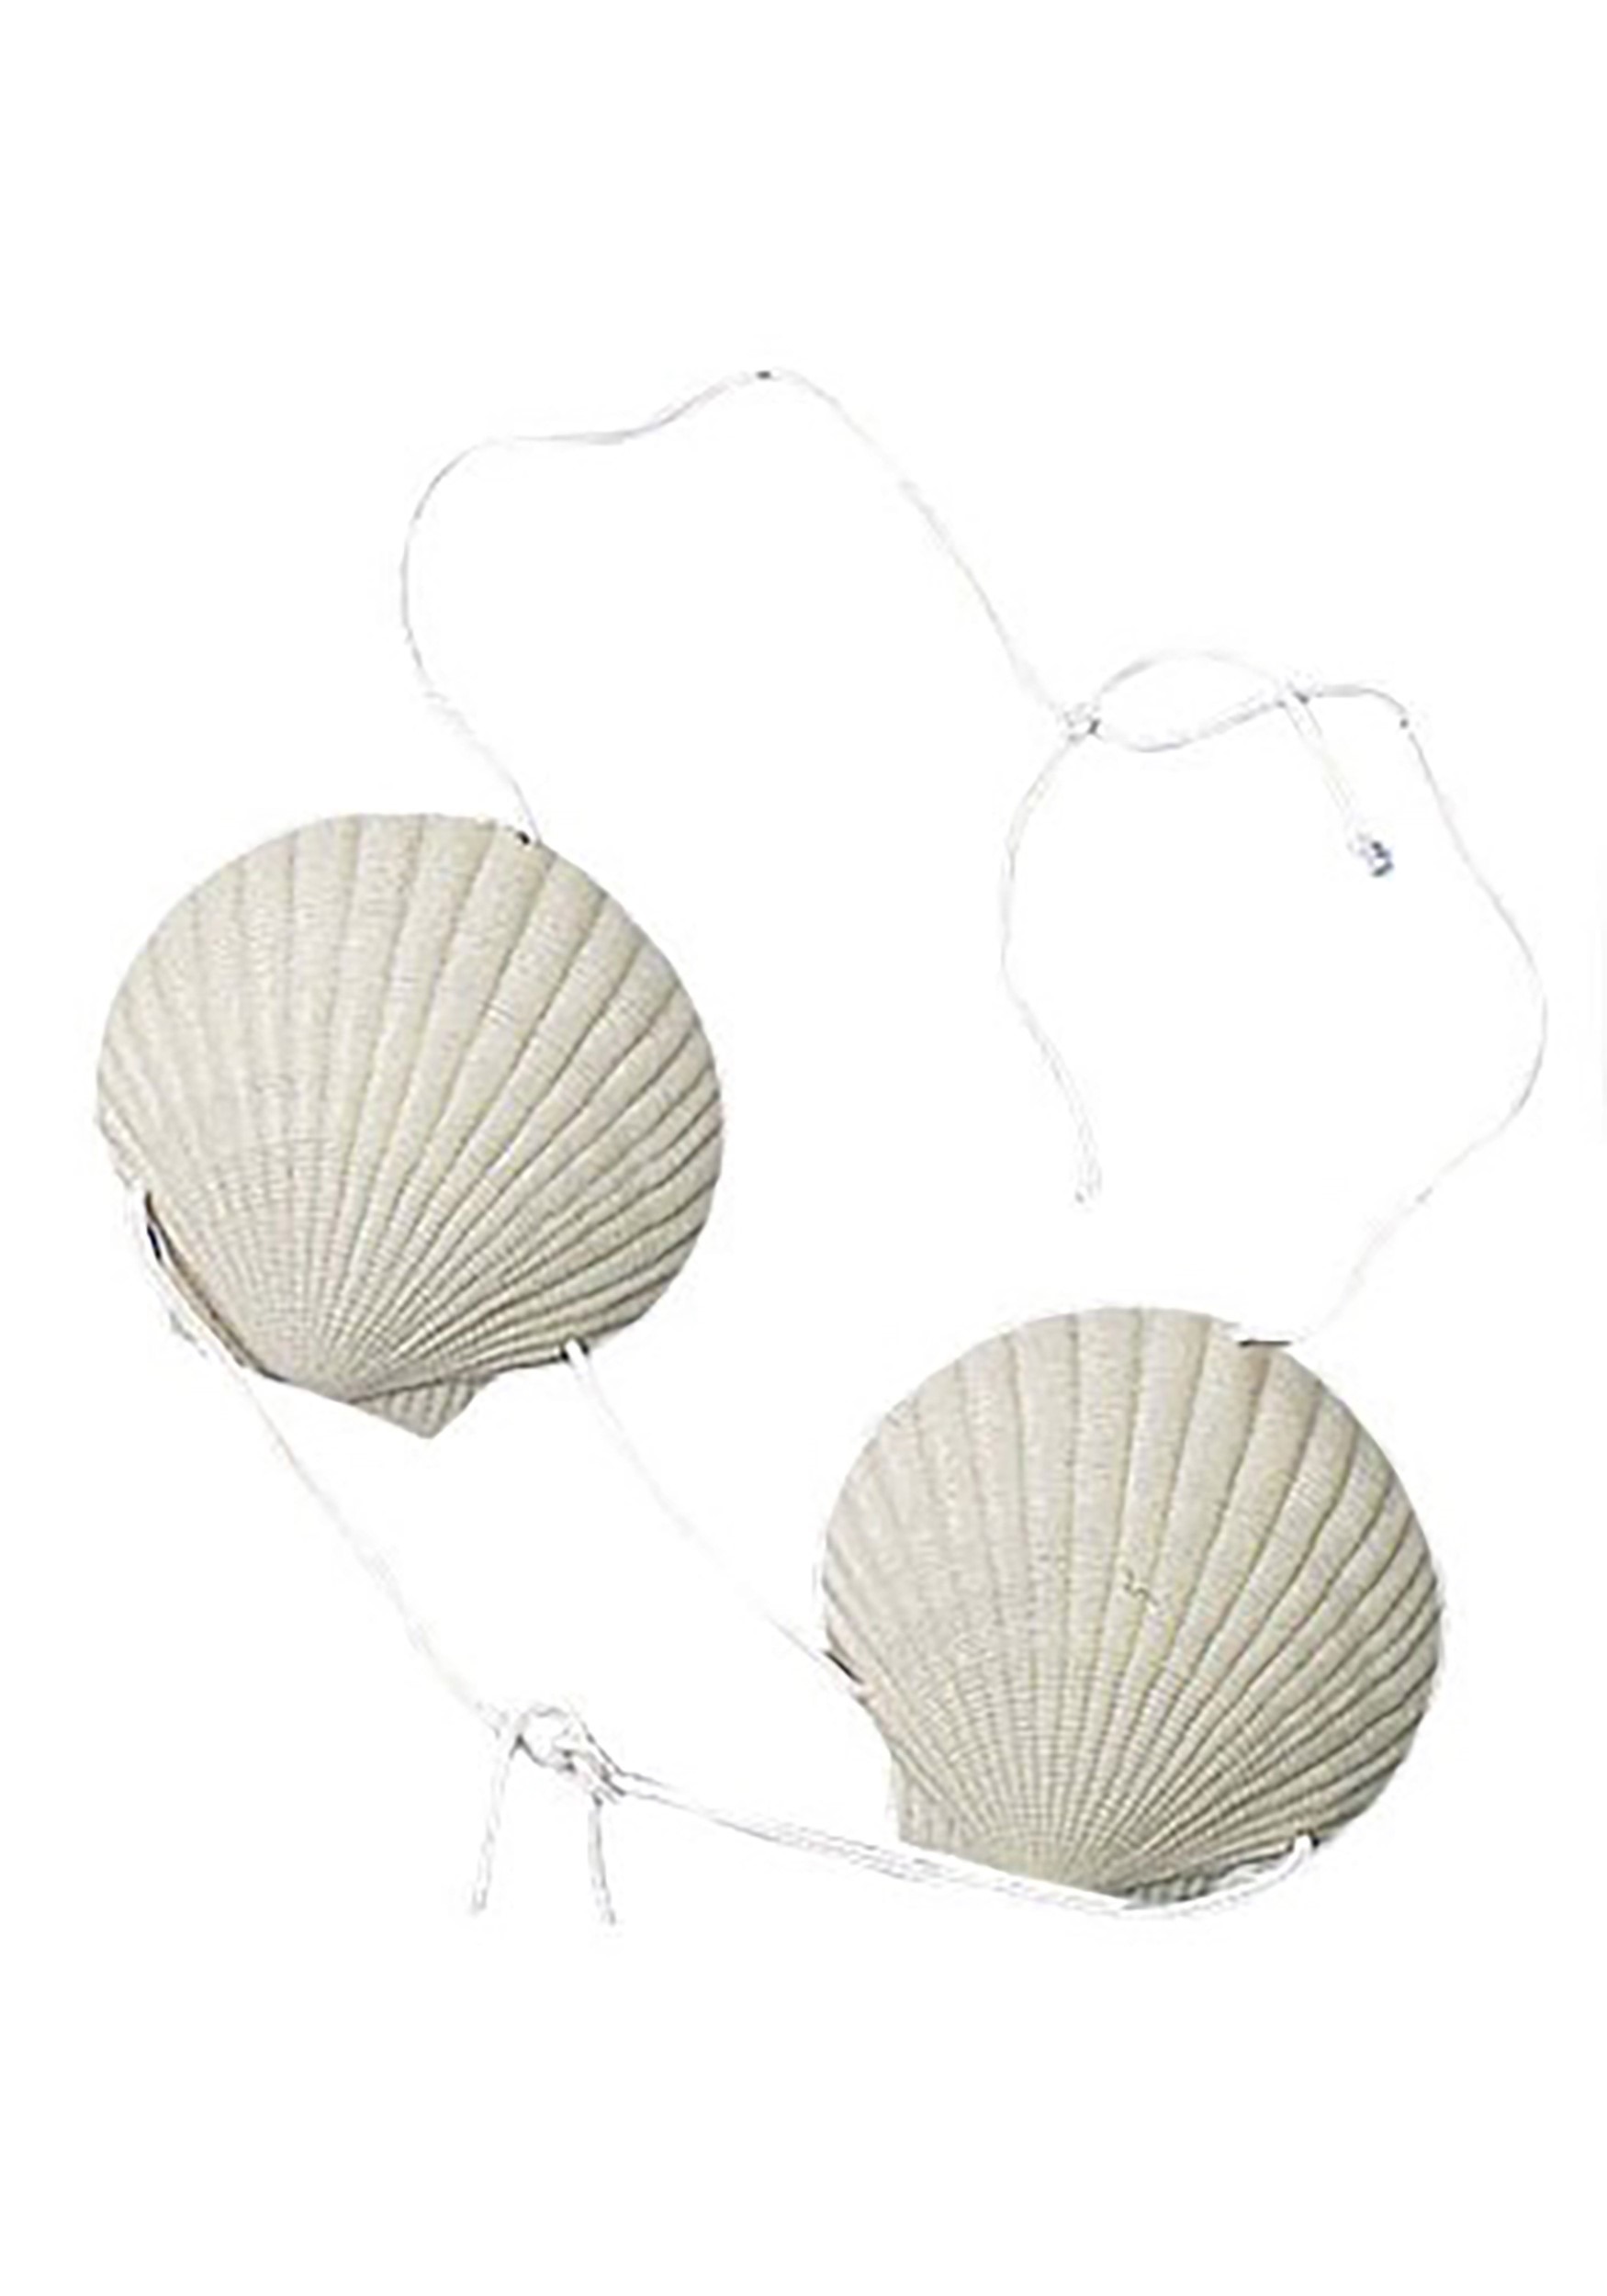 https://images.halloween.com/products/3720/1-1/shell-bra.jpg